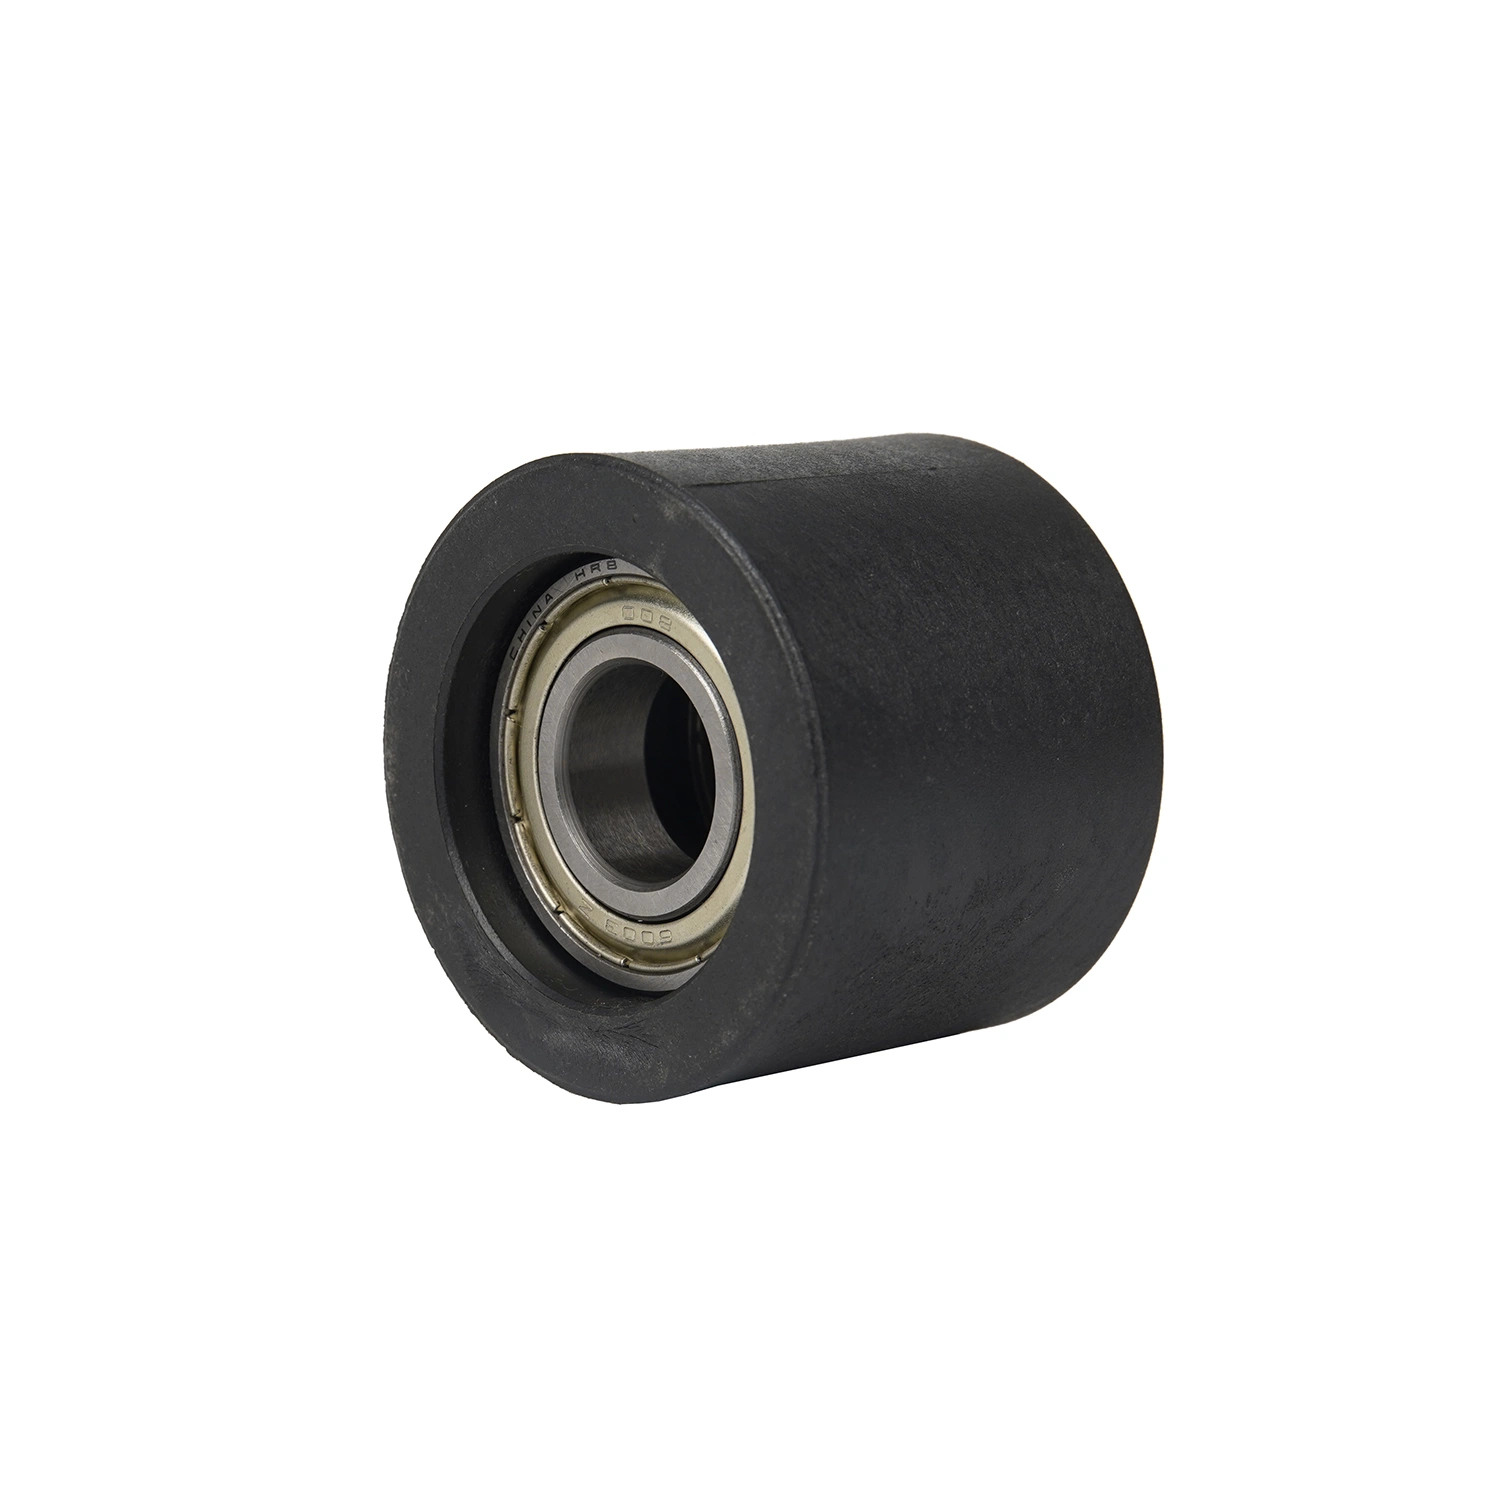 High quality/High cost performance Customized Nylon Sleeve Bushing Injection Nylon PA Plastic Product for Industry Plastic Molding